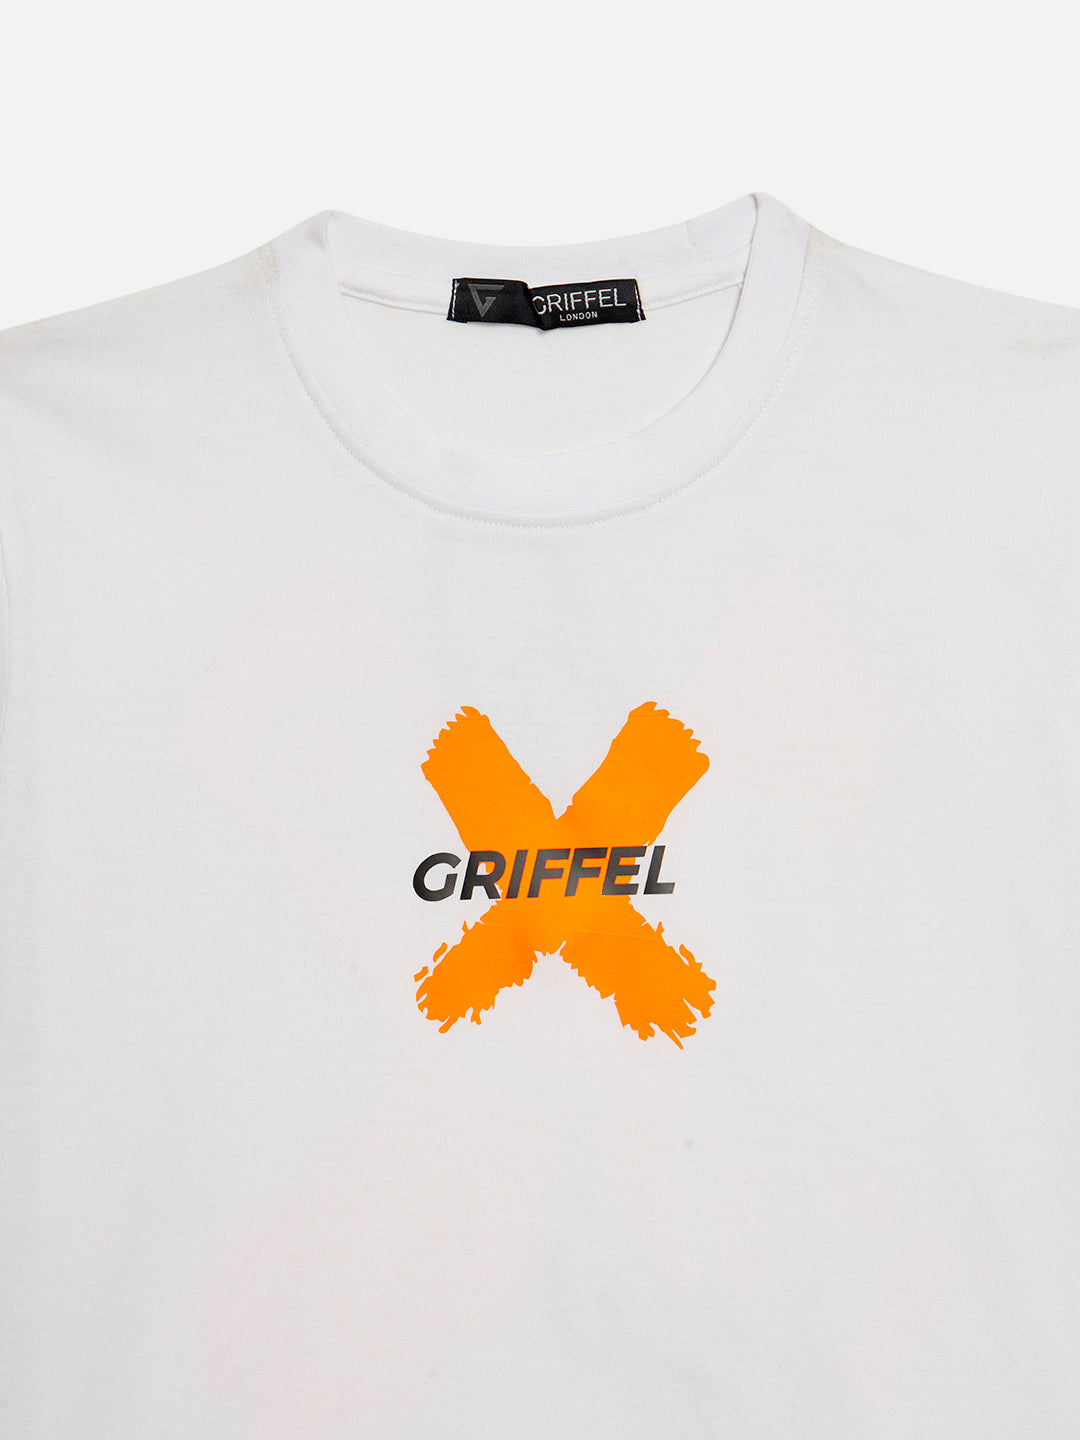 GRIFFEL Girls Kids White Co-Ord T-shirt and Short Set - griffel